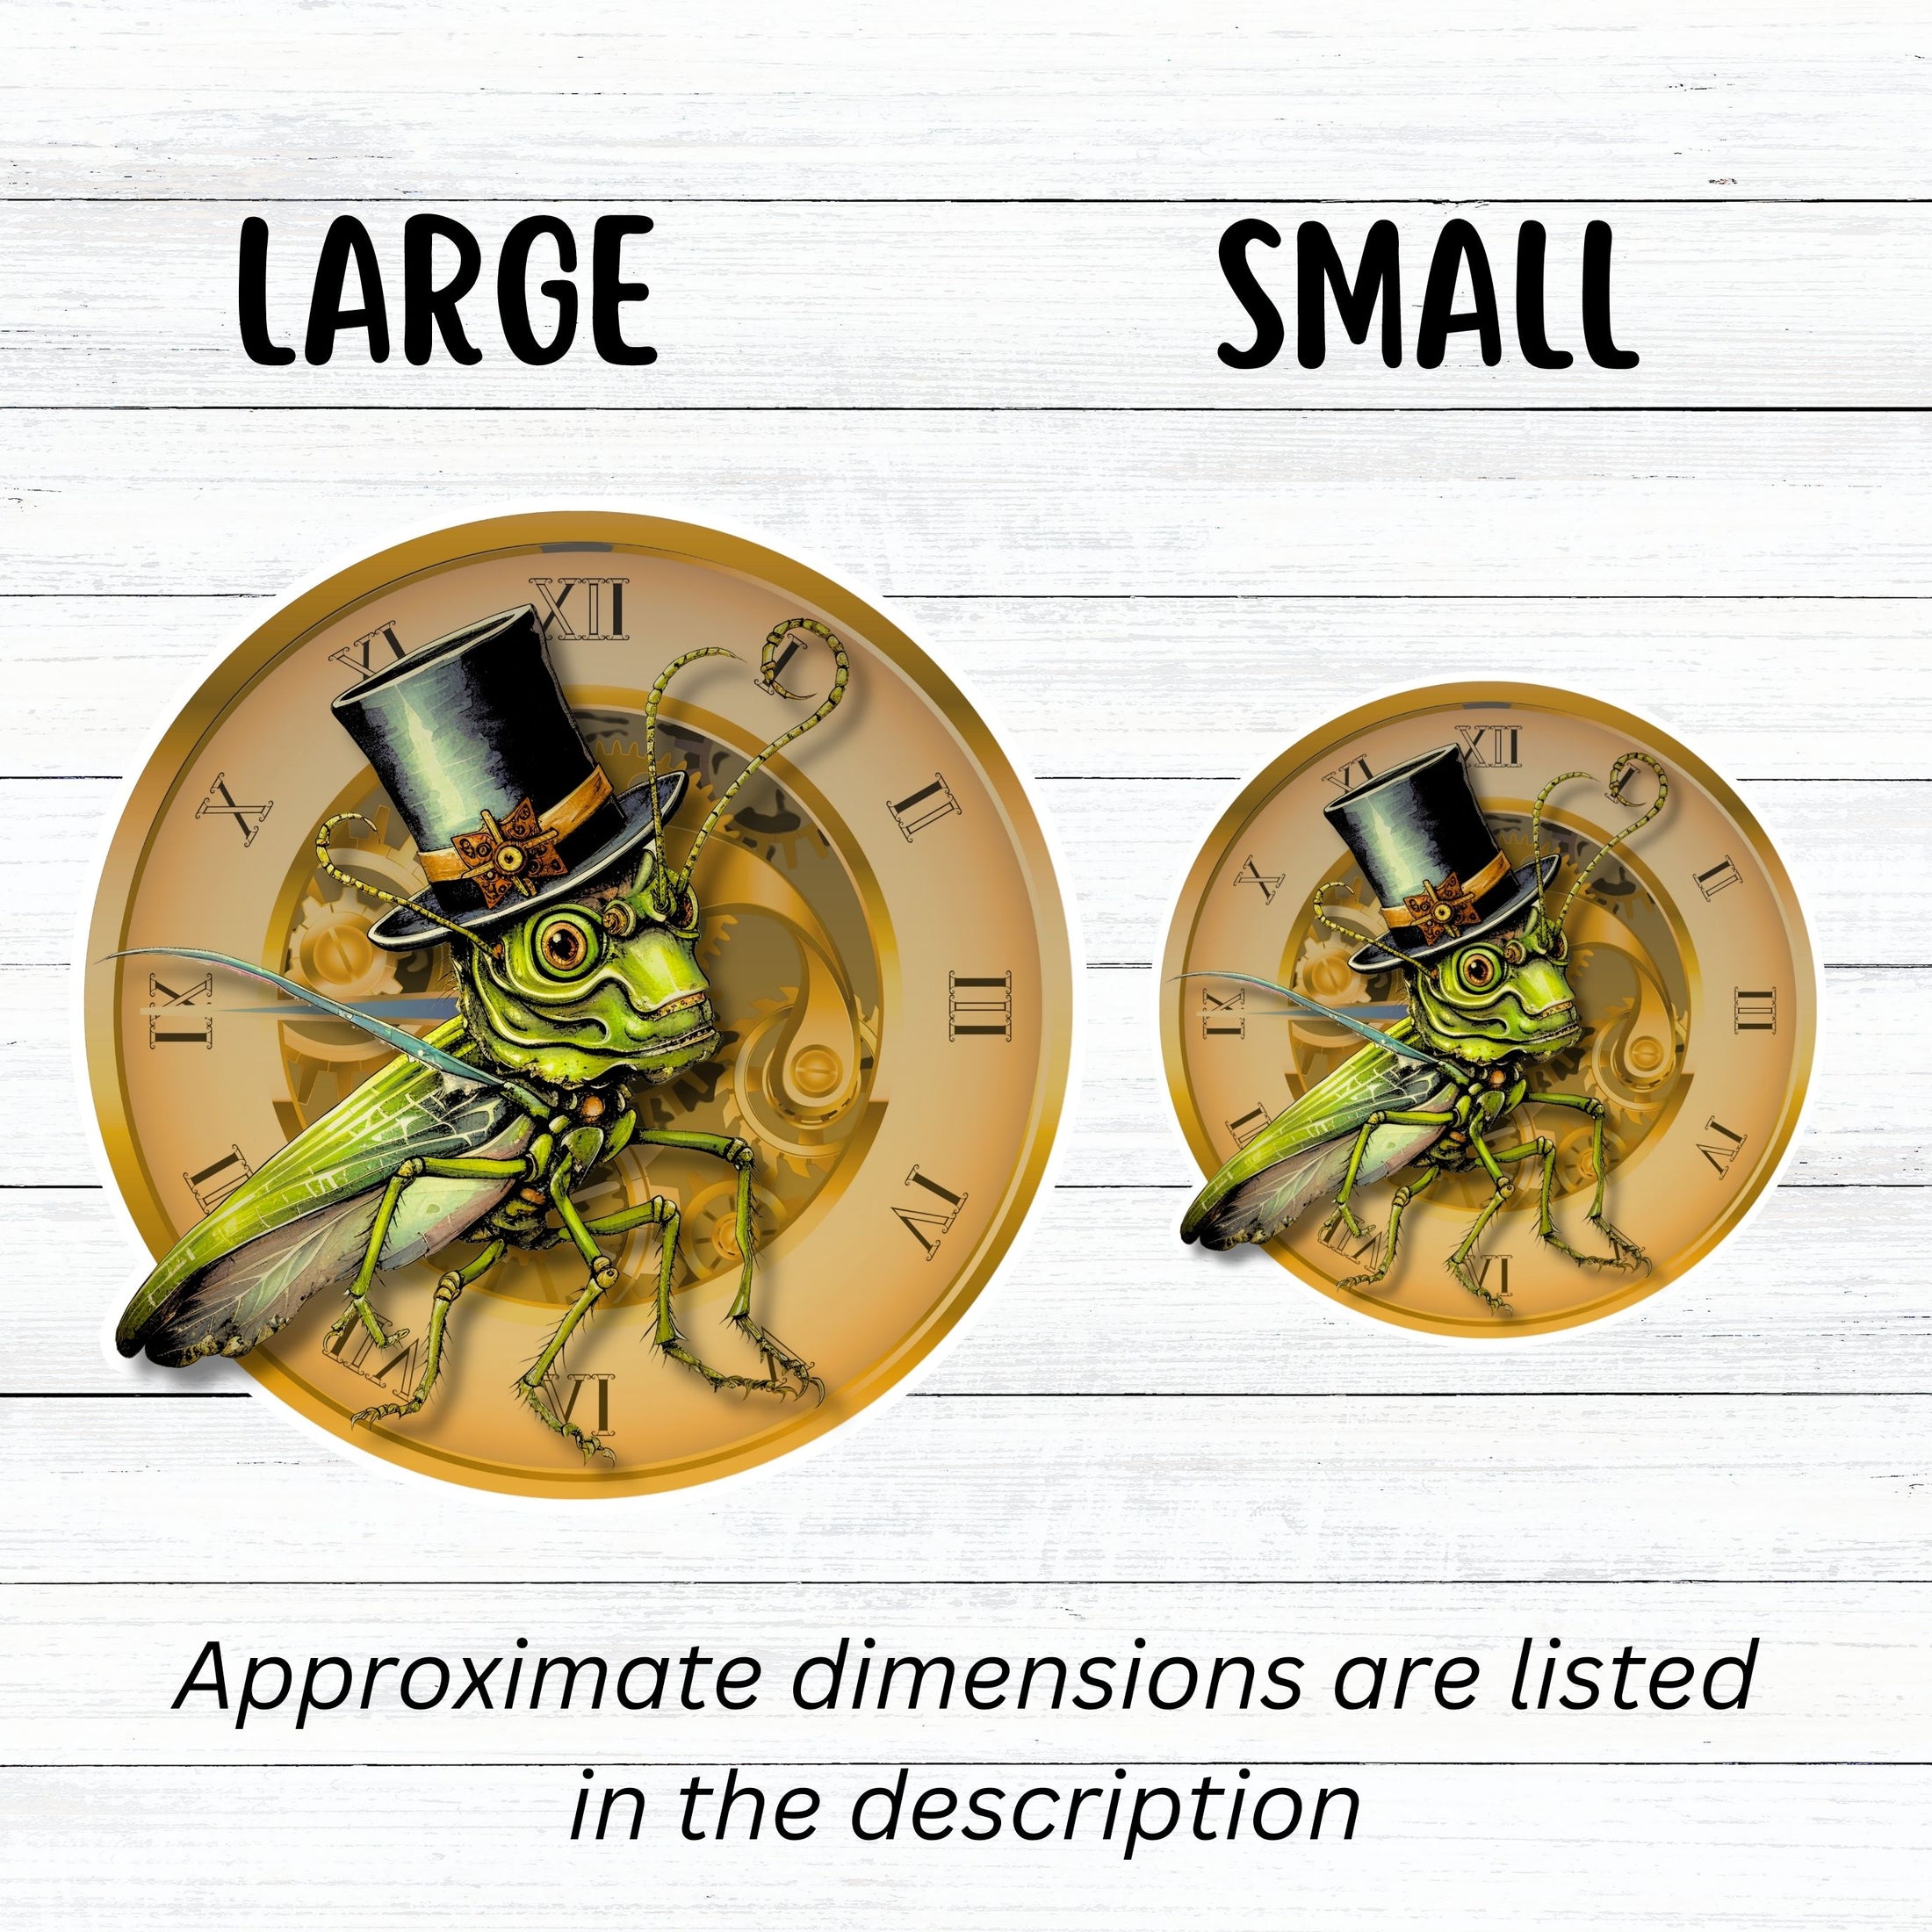 This image shows large and small steampunk grasshopper stickers next to each other.